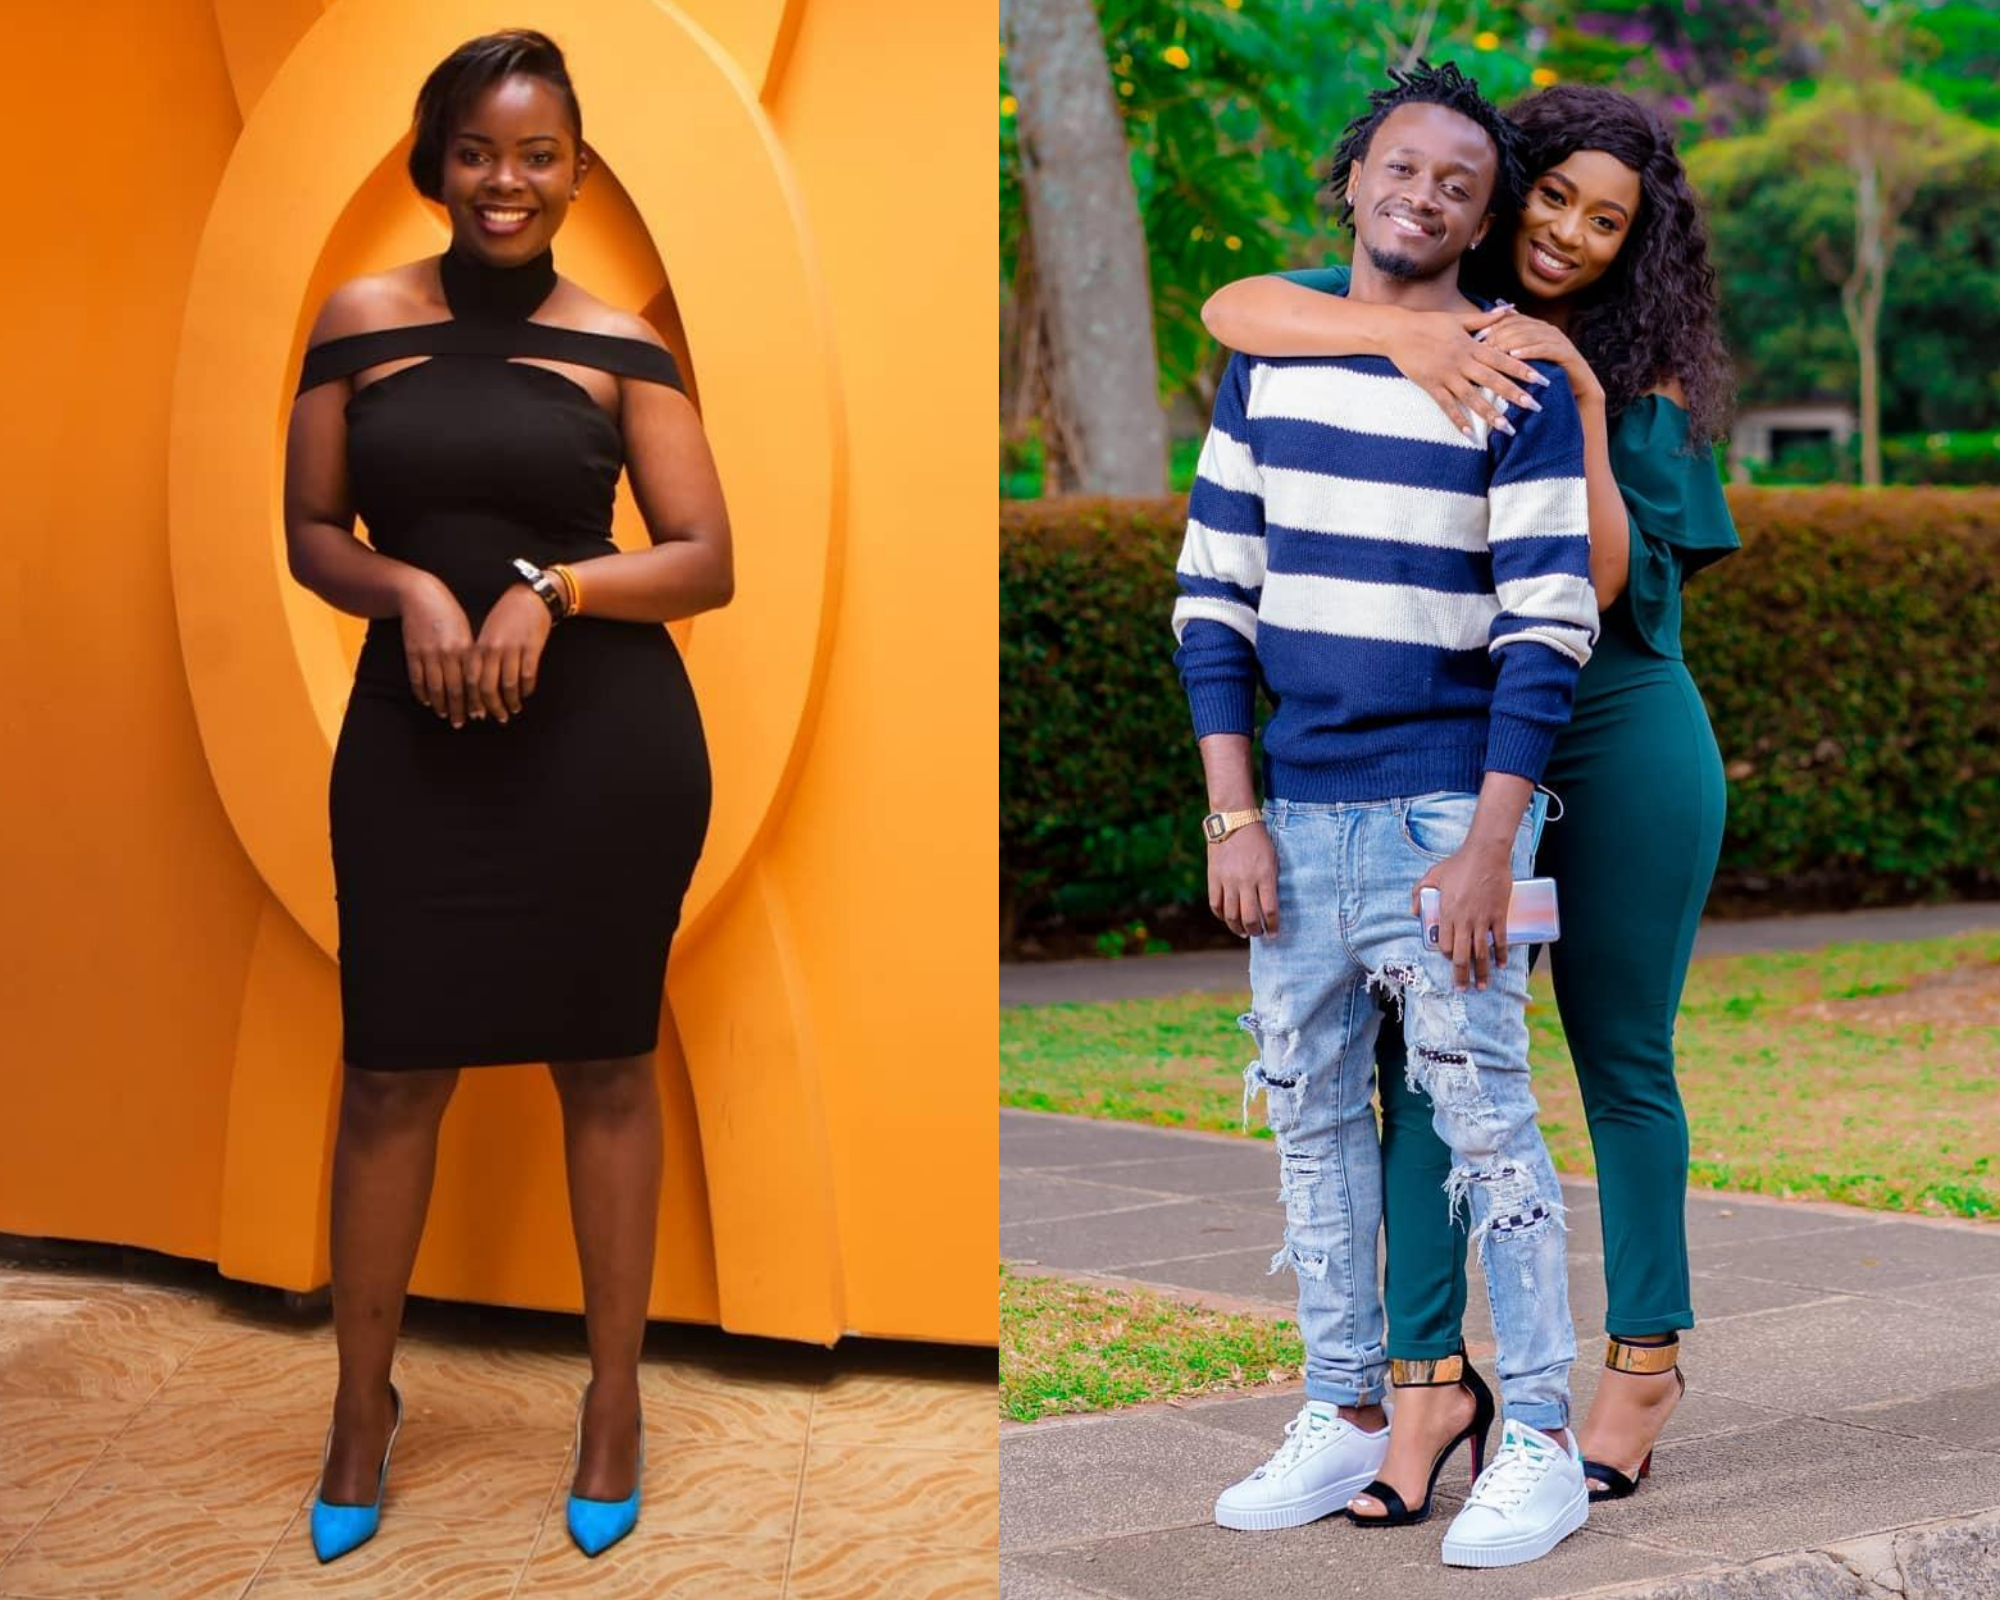 Yvette Obura: Bahati Moved On Fast After Breaking Up With Me, He Didn’t Give Me Time 